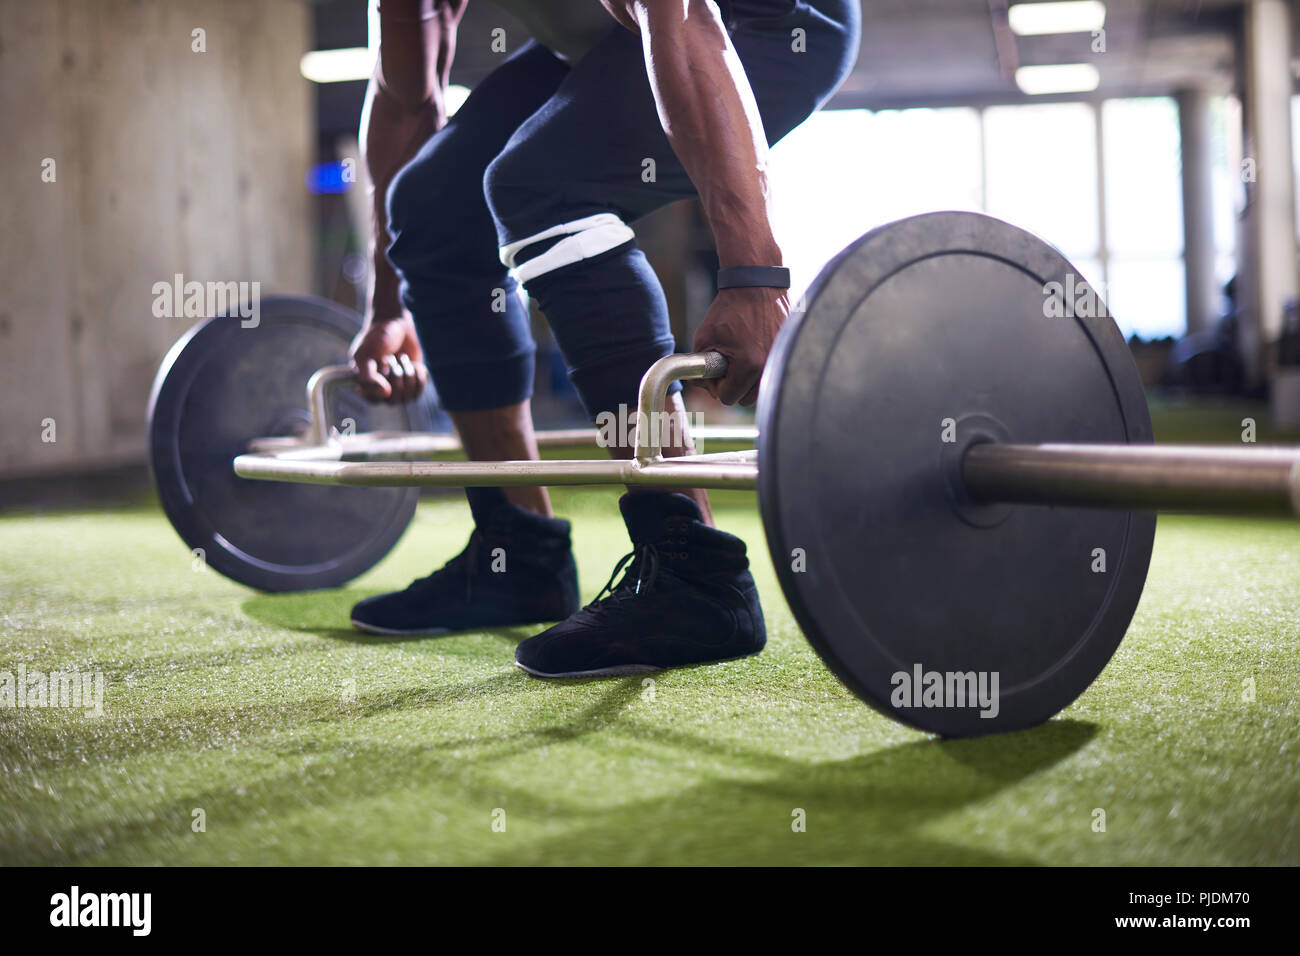 Man lifting barbell in gym Stock Photo